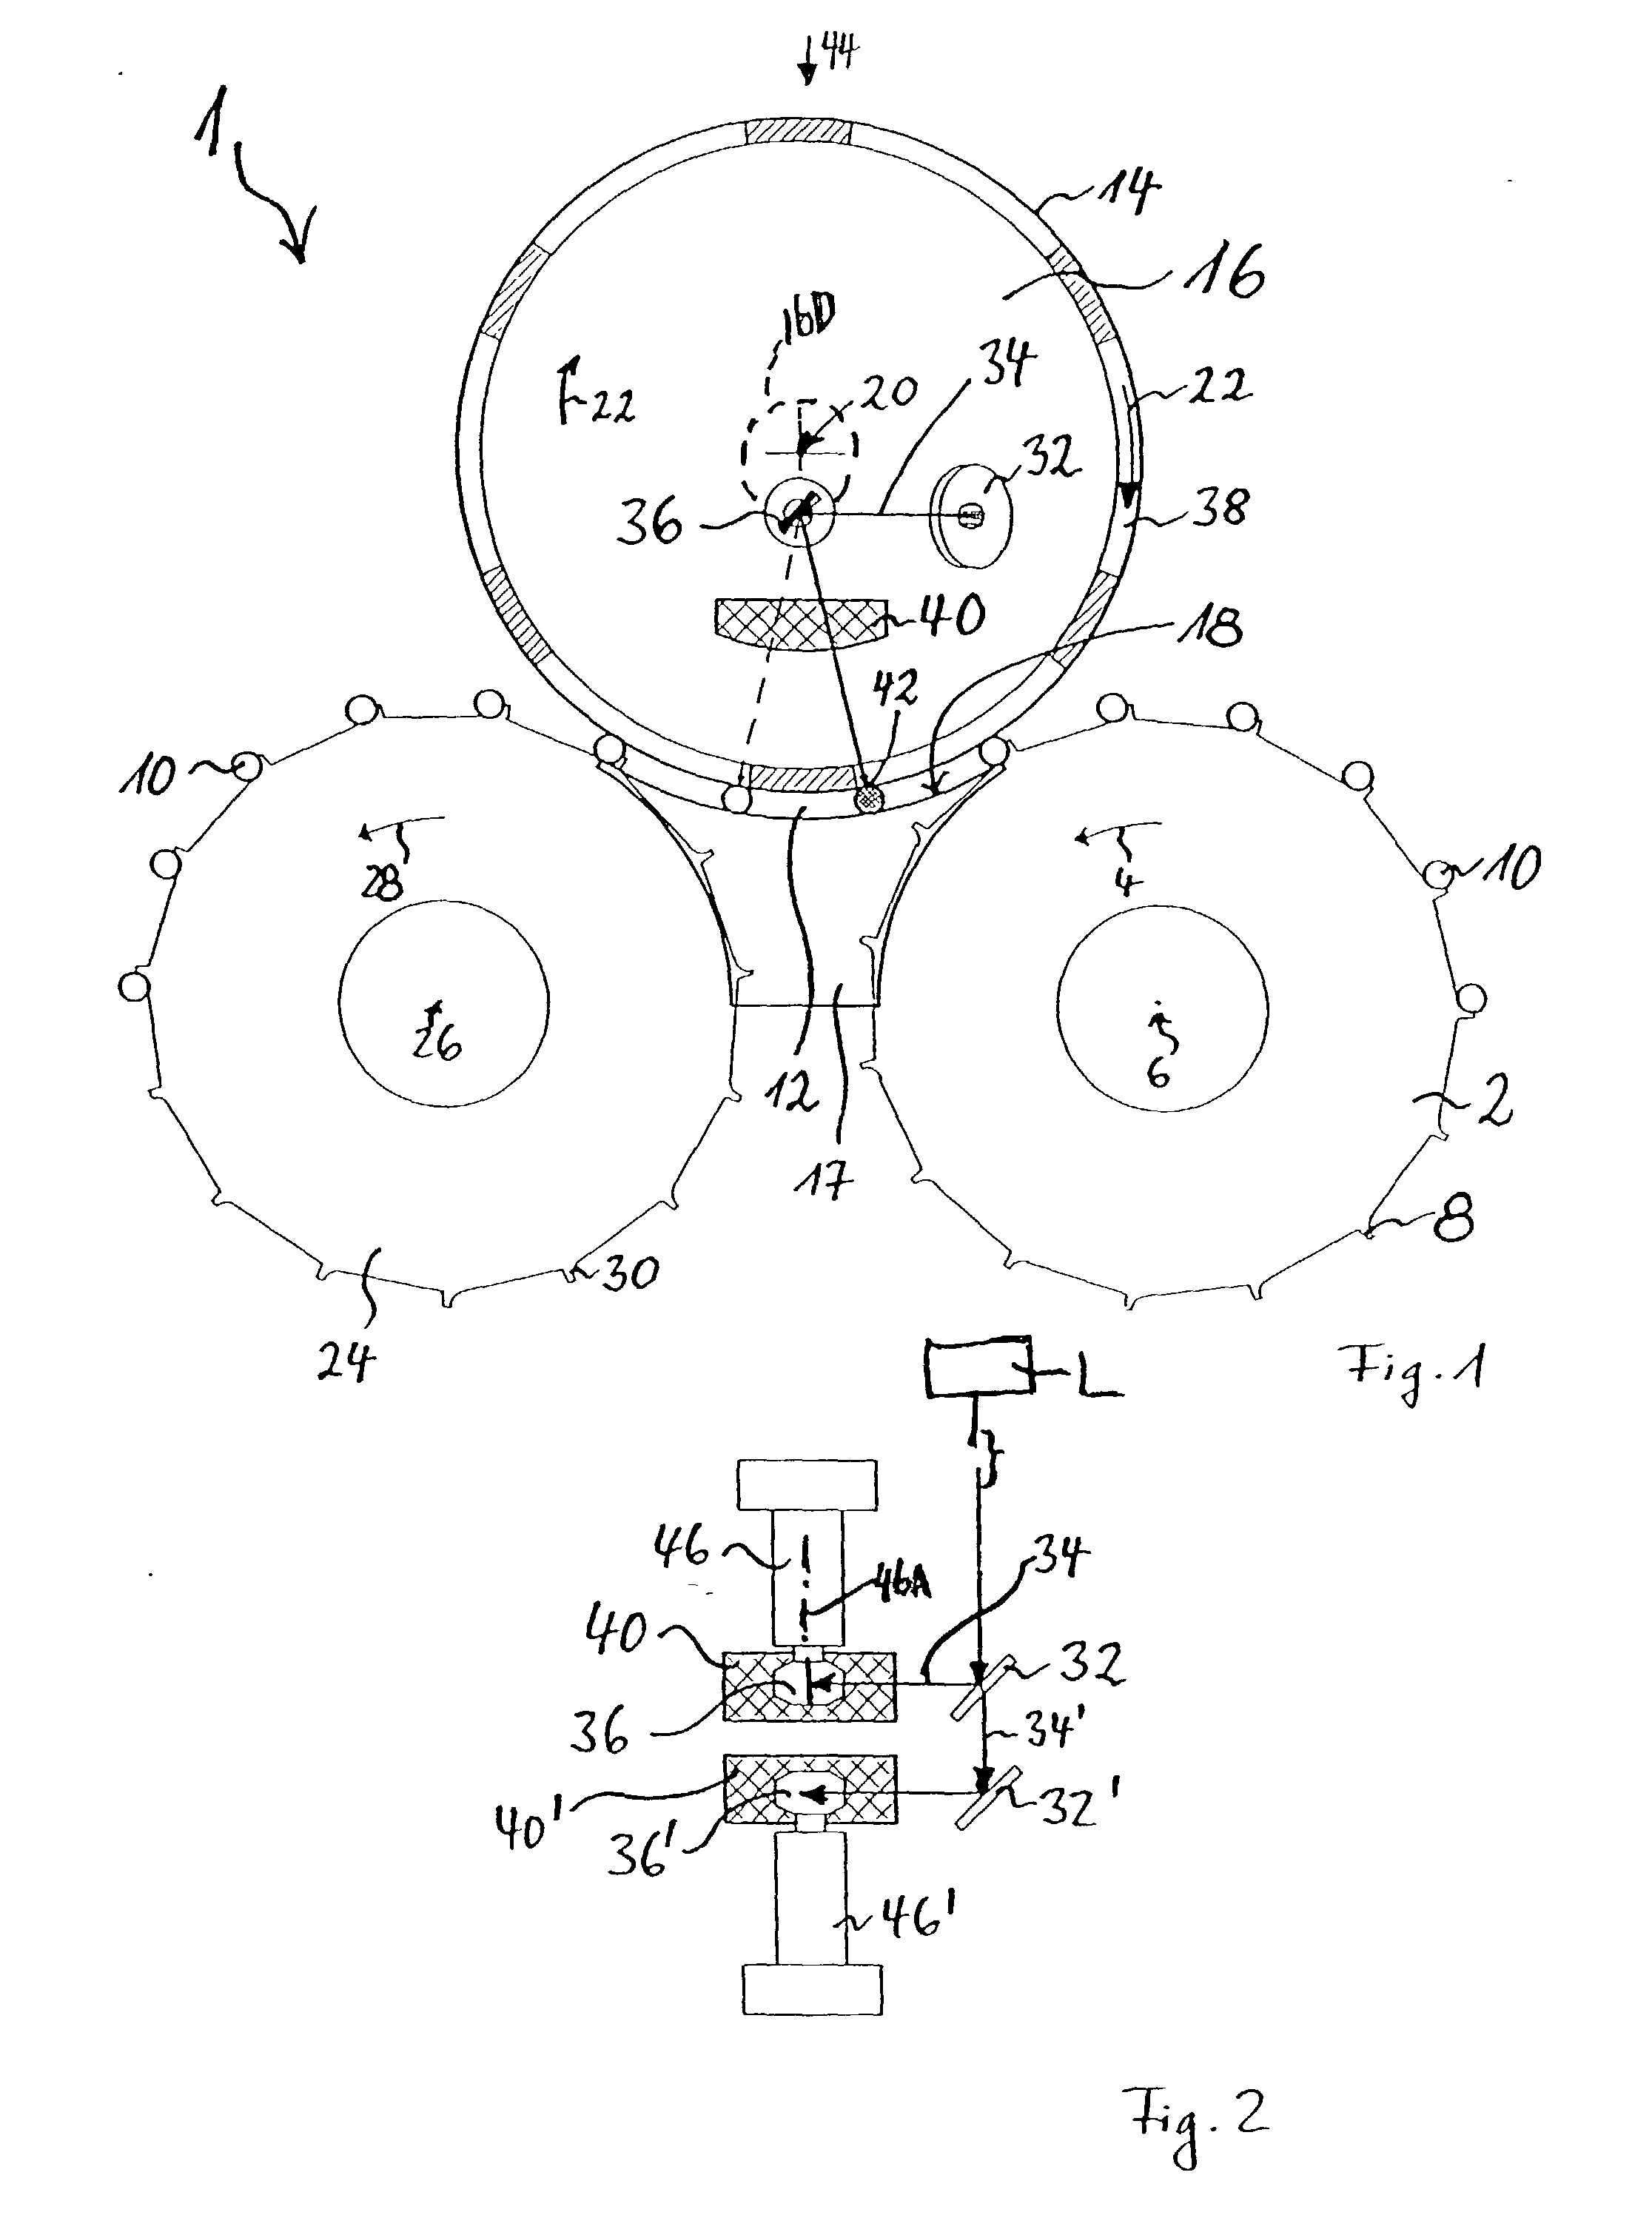 Method of and apparatus for making perforations in the wrappers of rod-shaped products